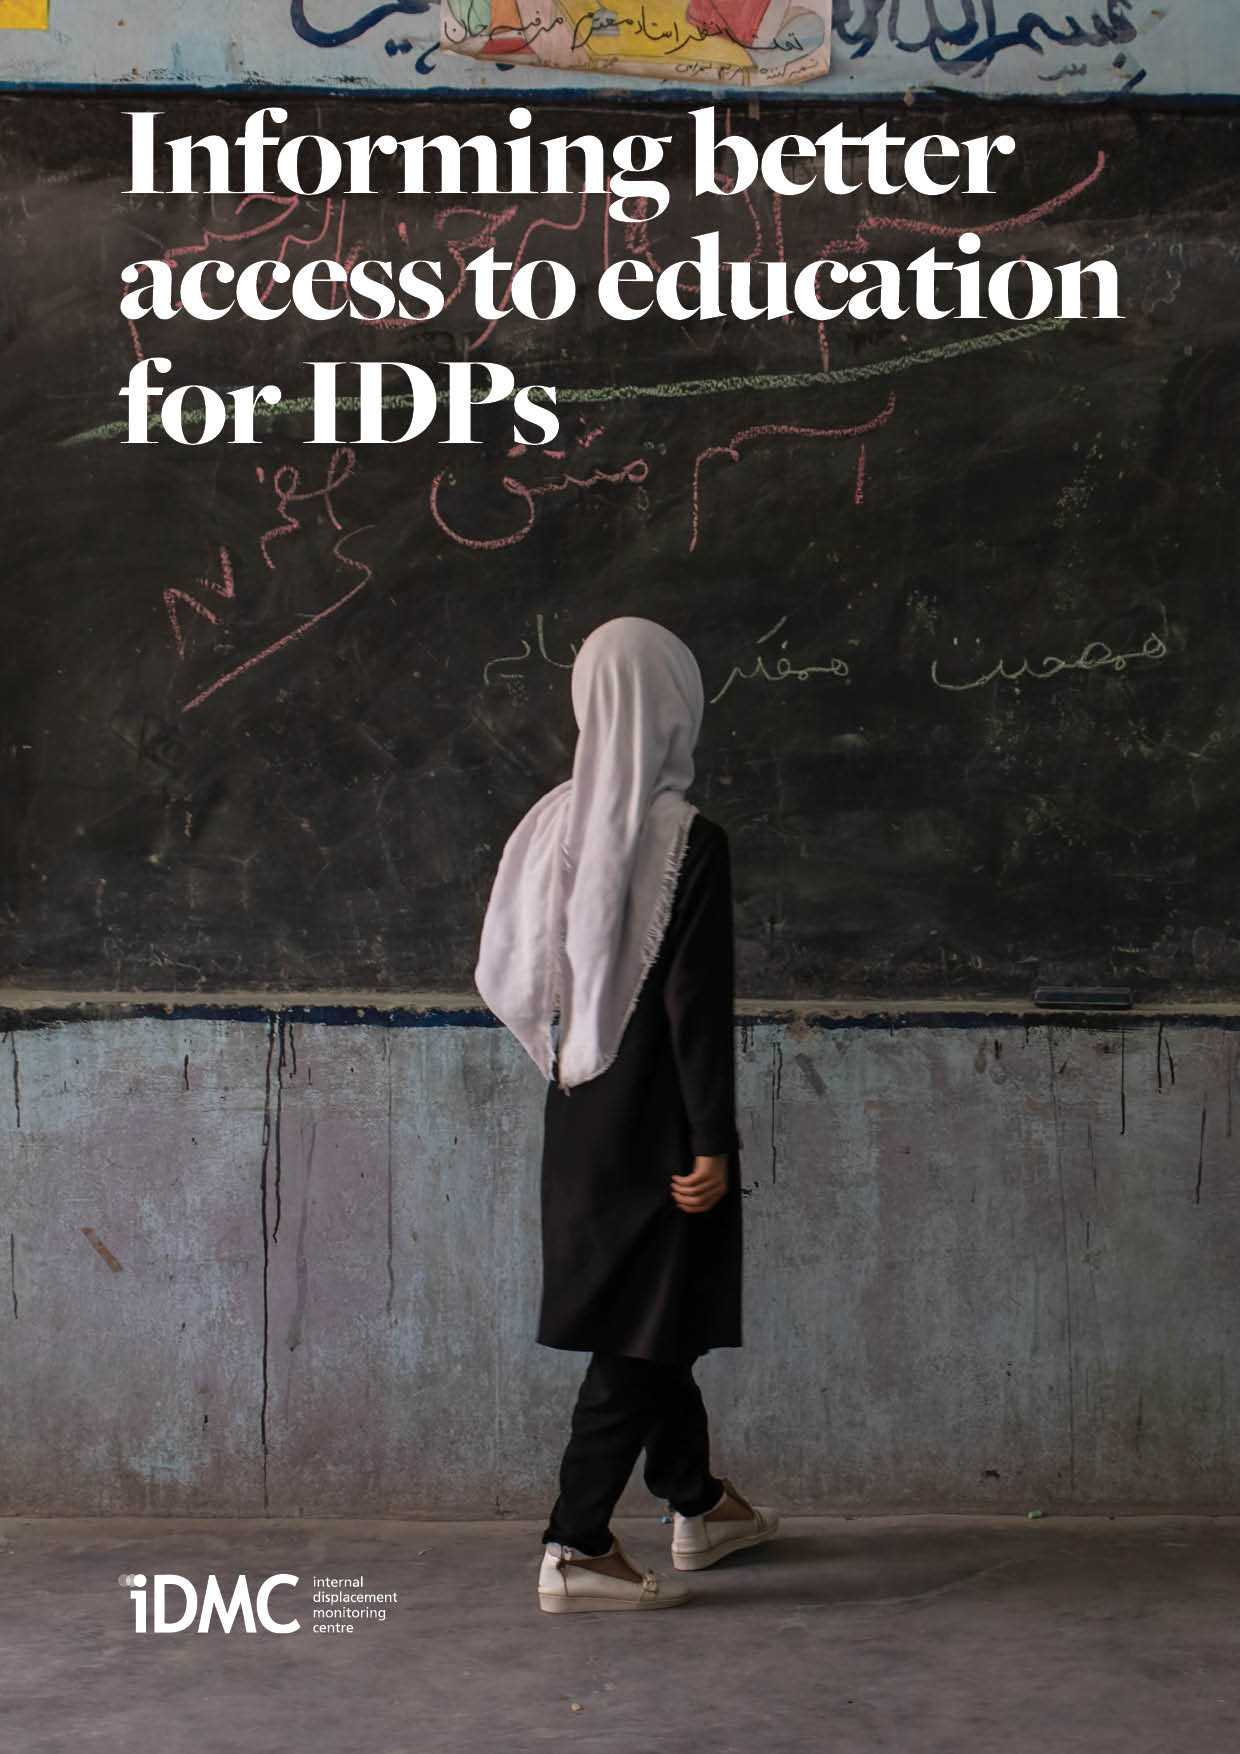  Informing better access to education for IDPs